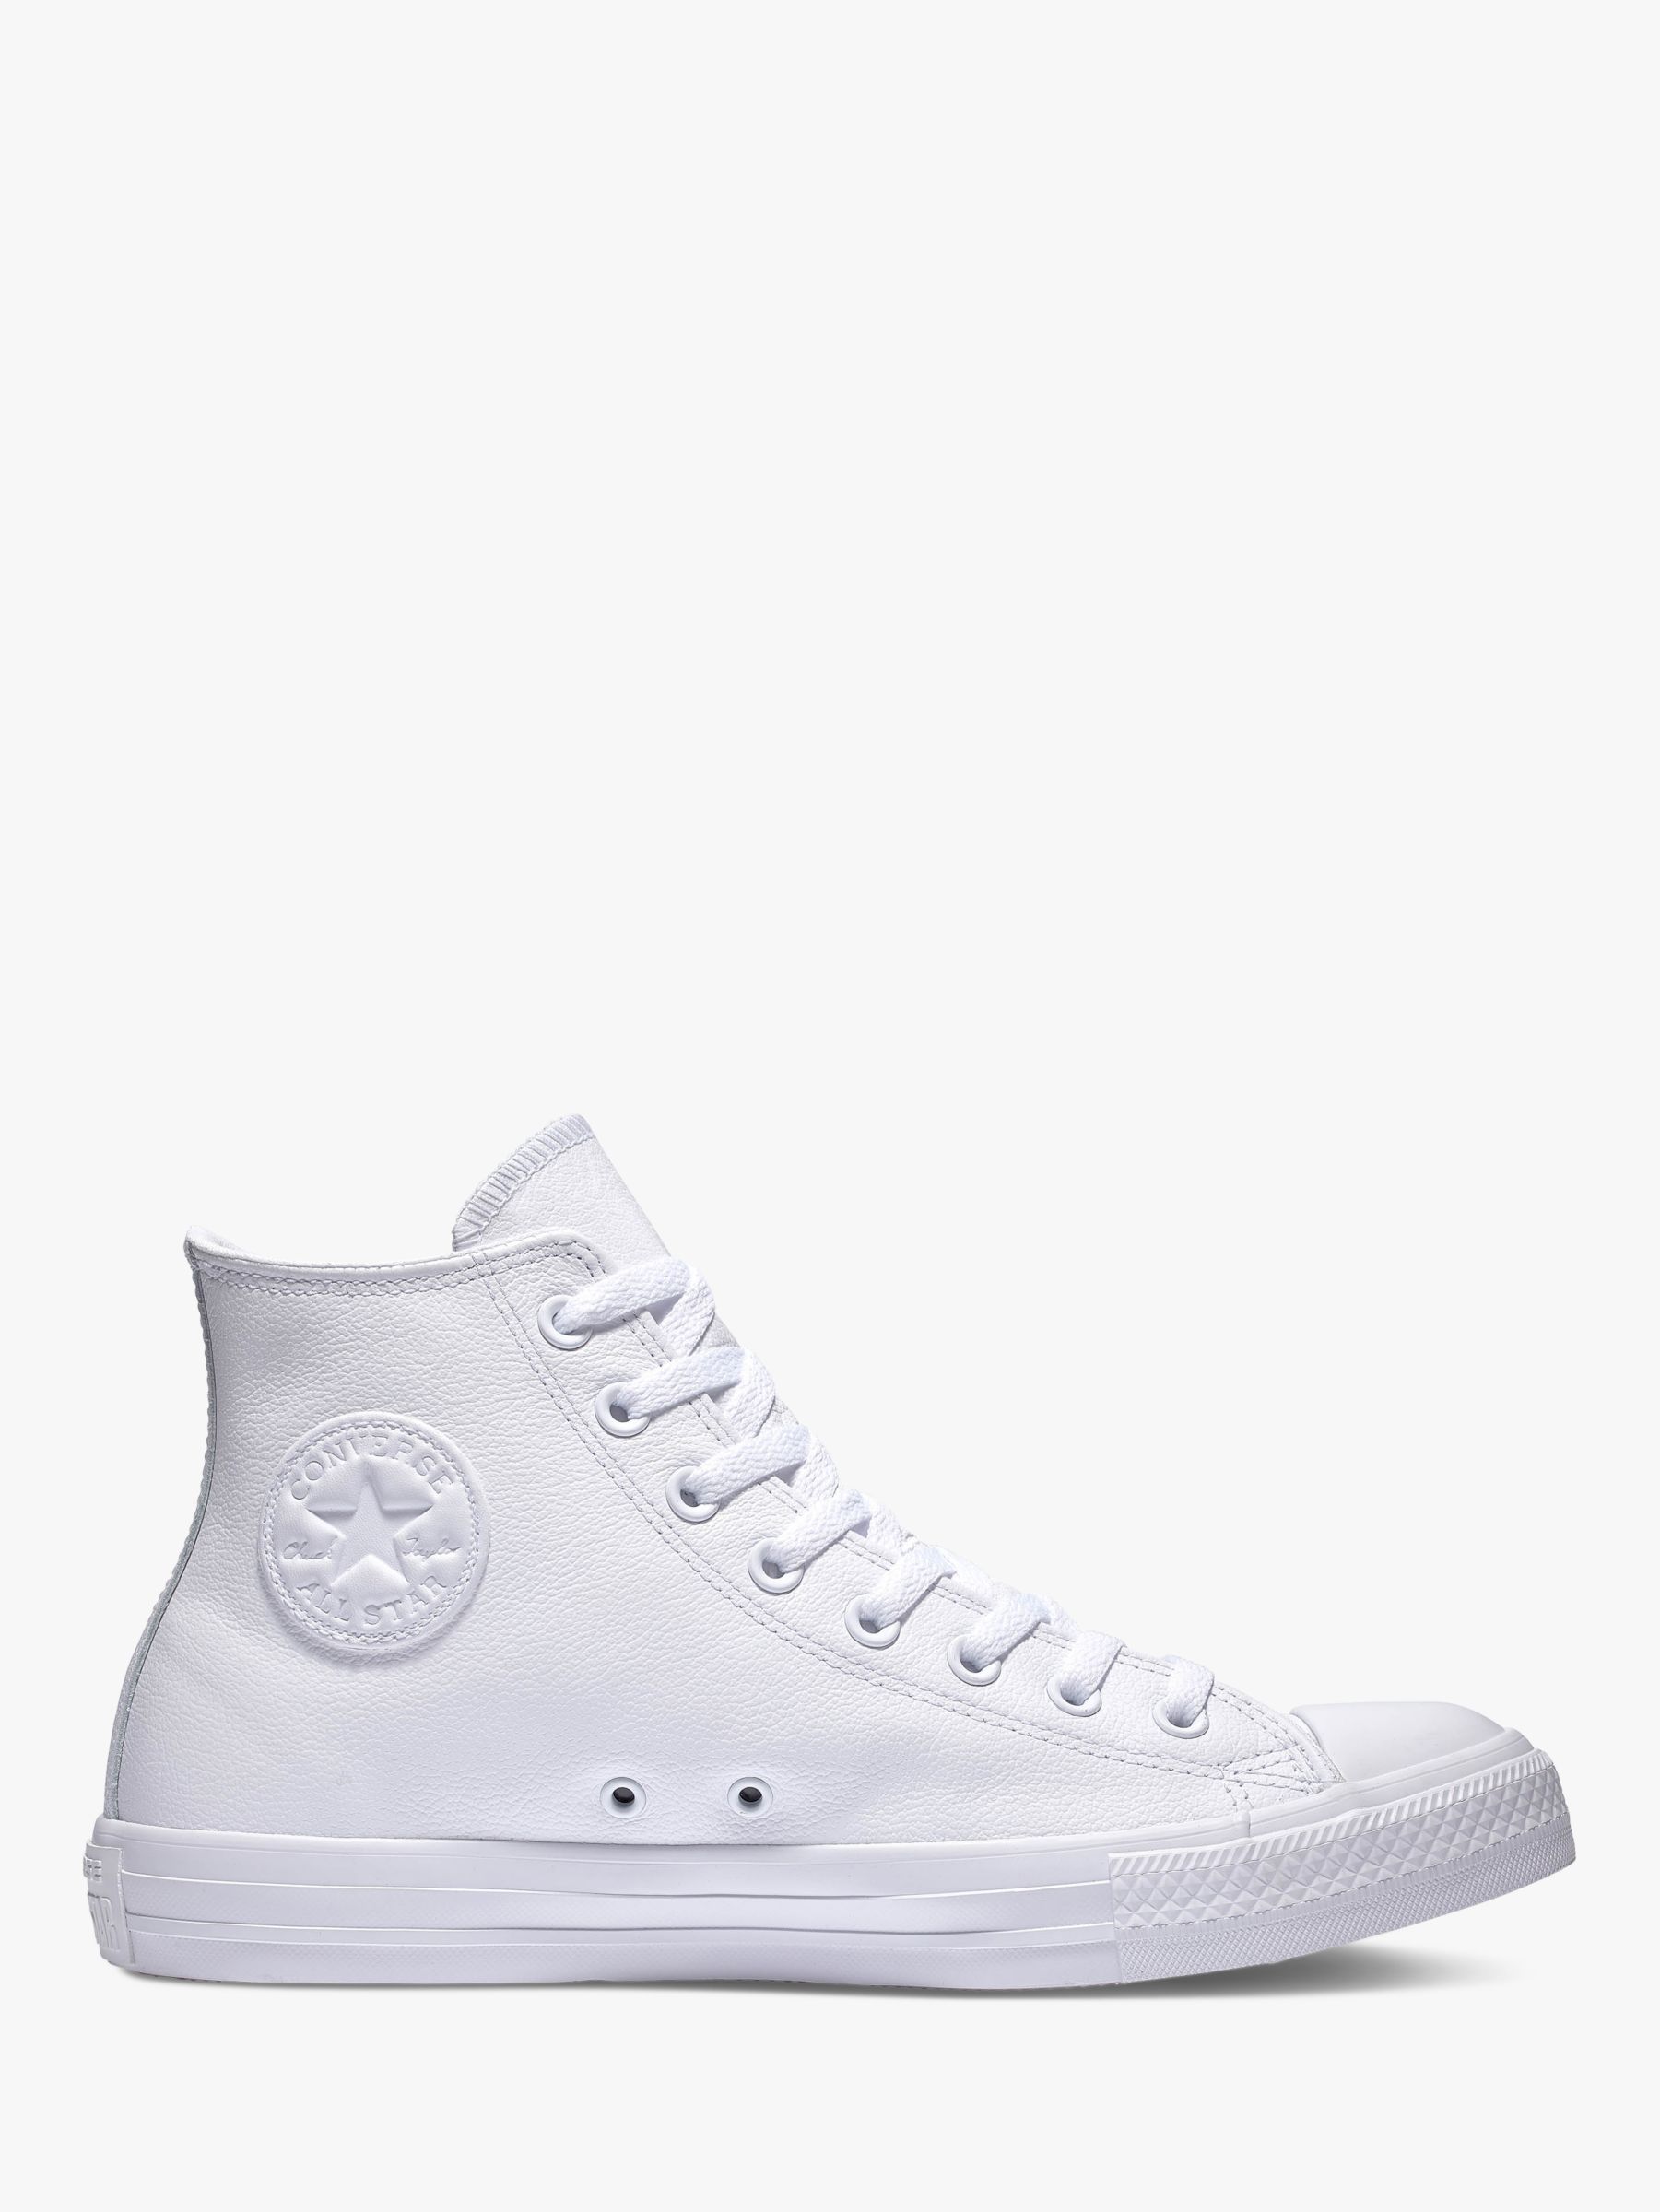 Converse All Star Leather Hi-Top 